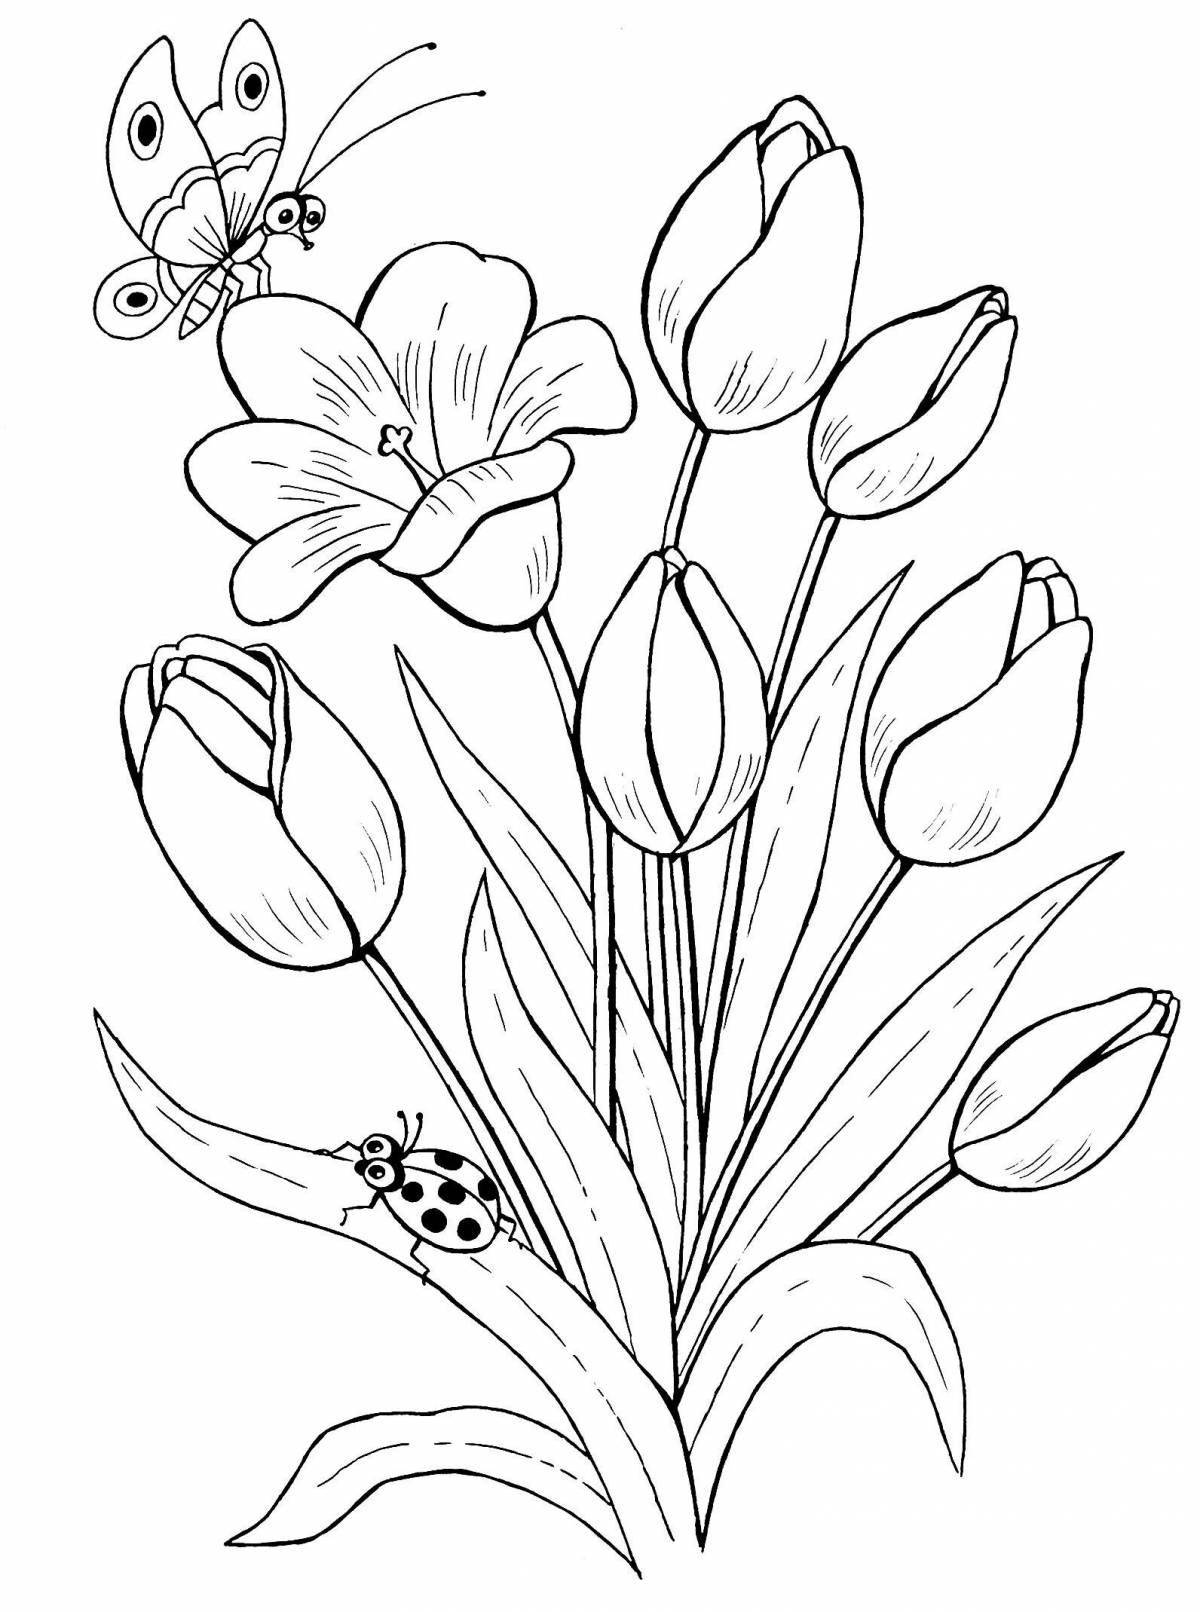 Lovely lazoric flower coloring page